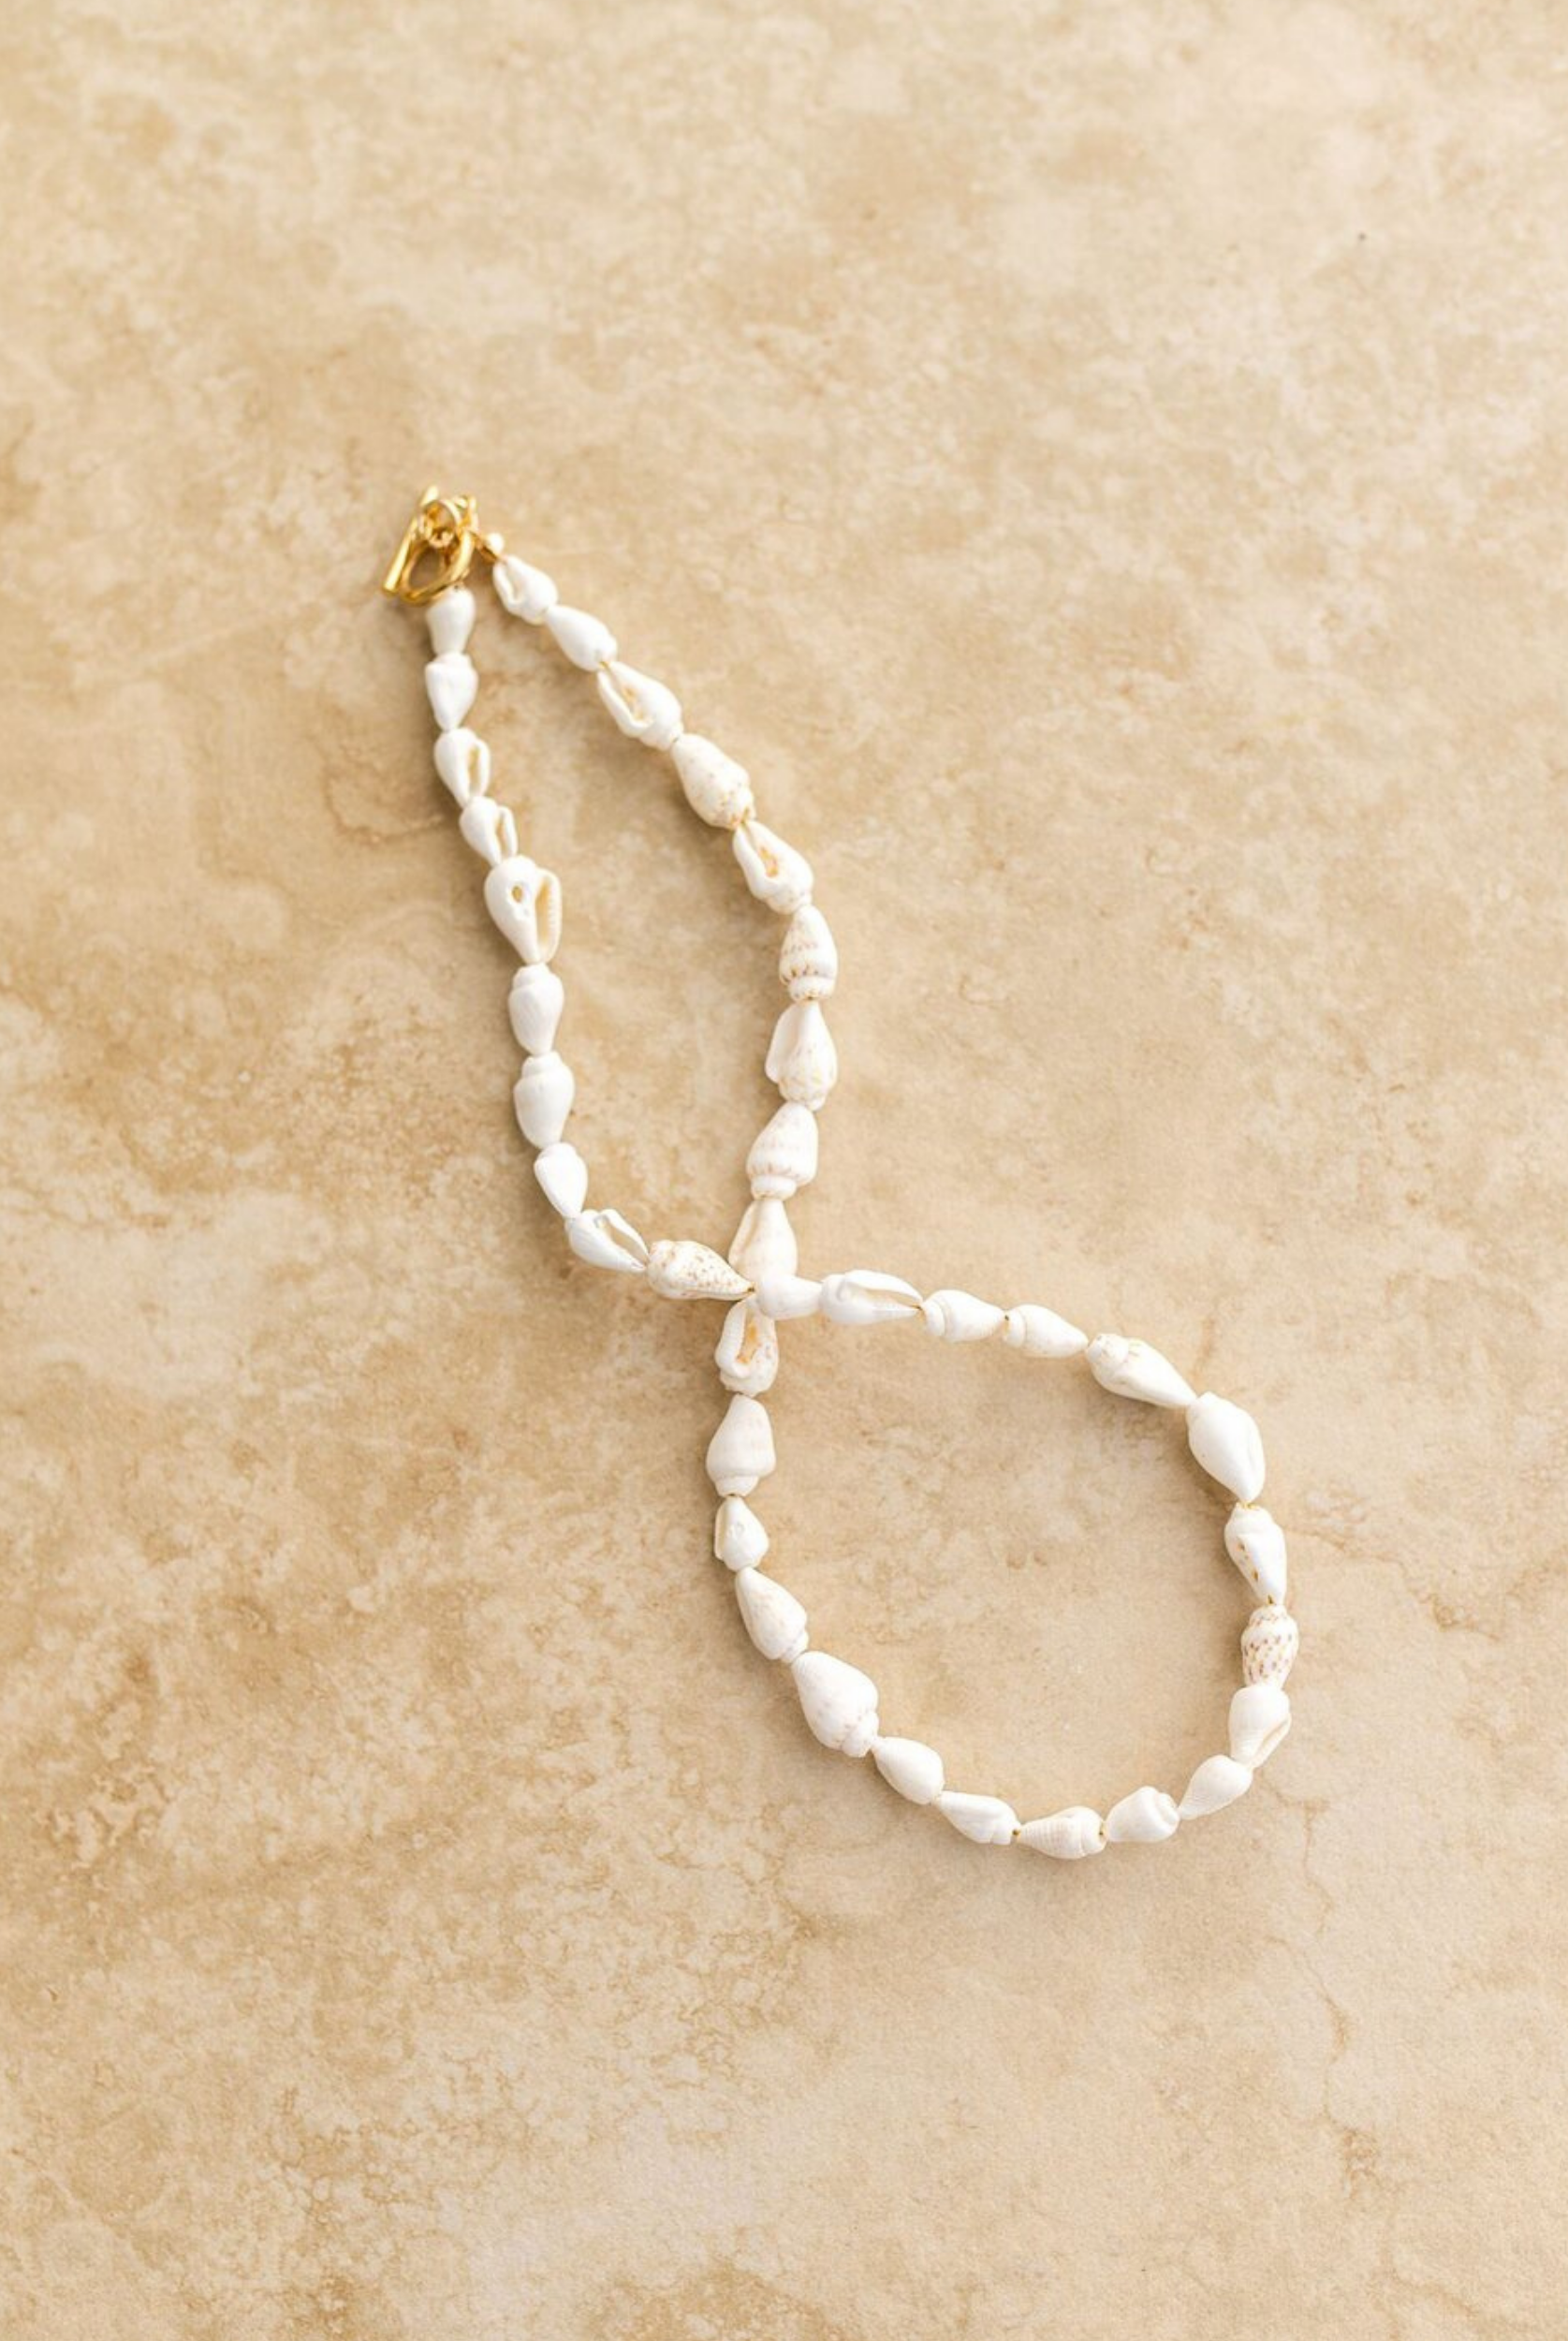 Shell necklace from Indigo & Wolfe